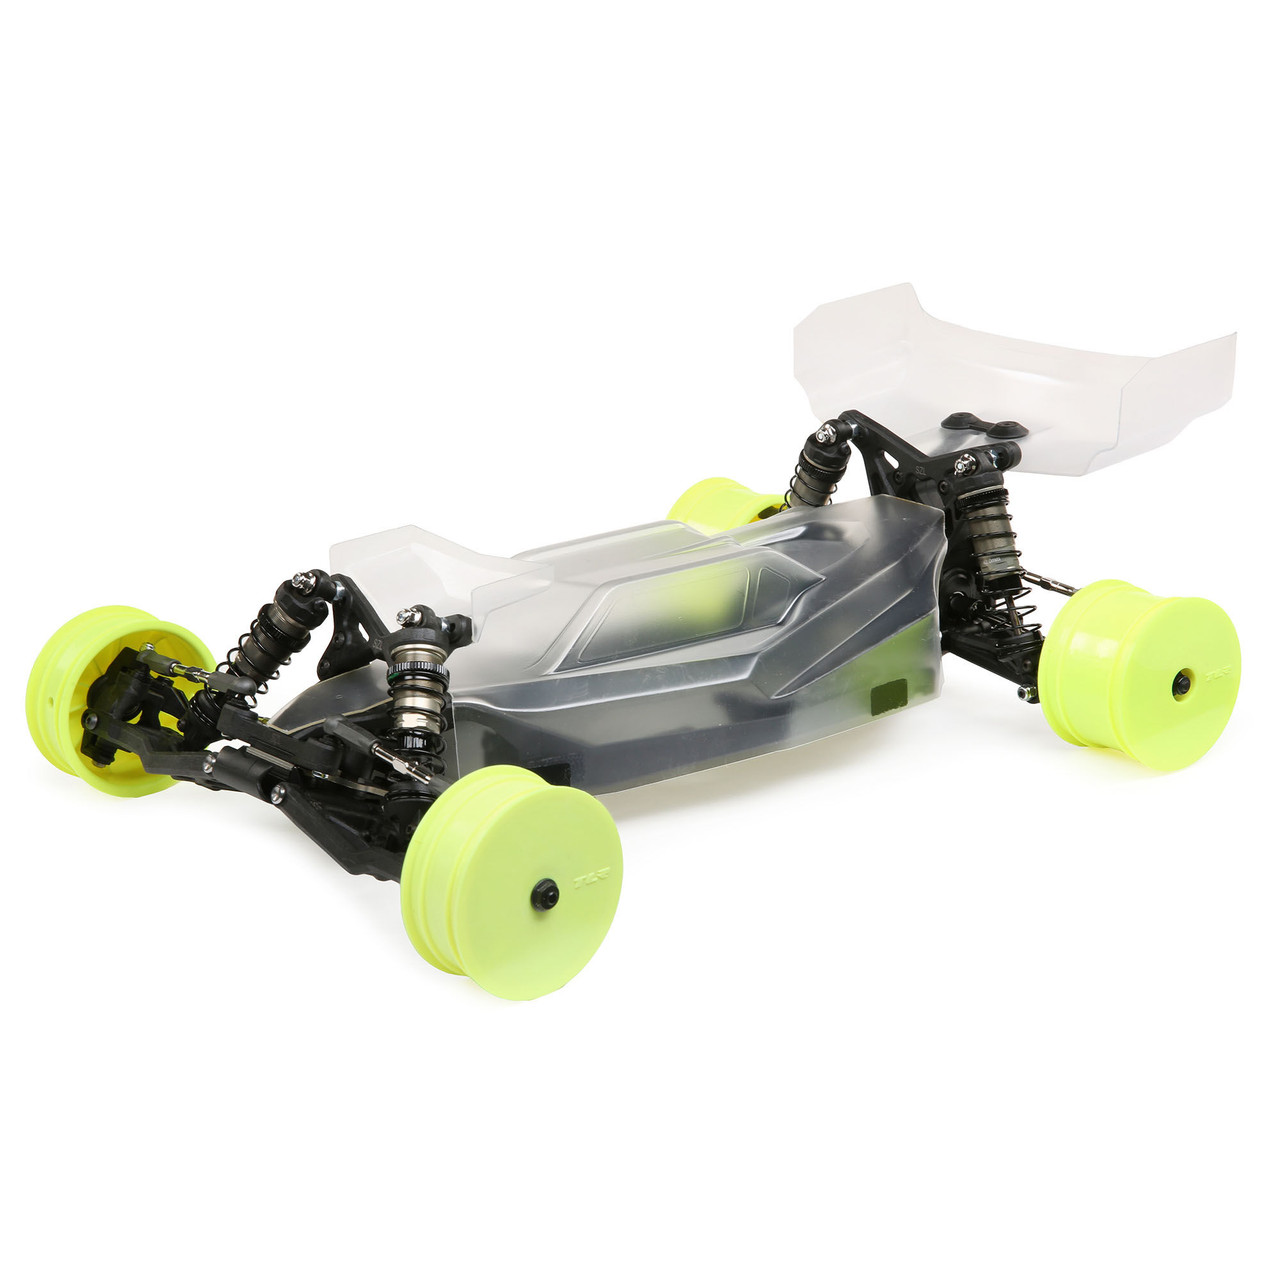 Team Losi Racing 22 5.0 DC Race Roller 1/10 2WD Electric Buggy Kit (Dirt/Clay)